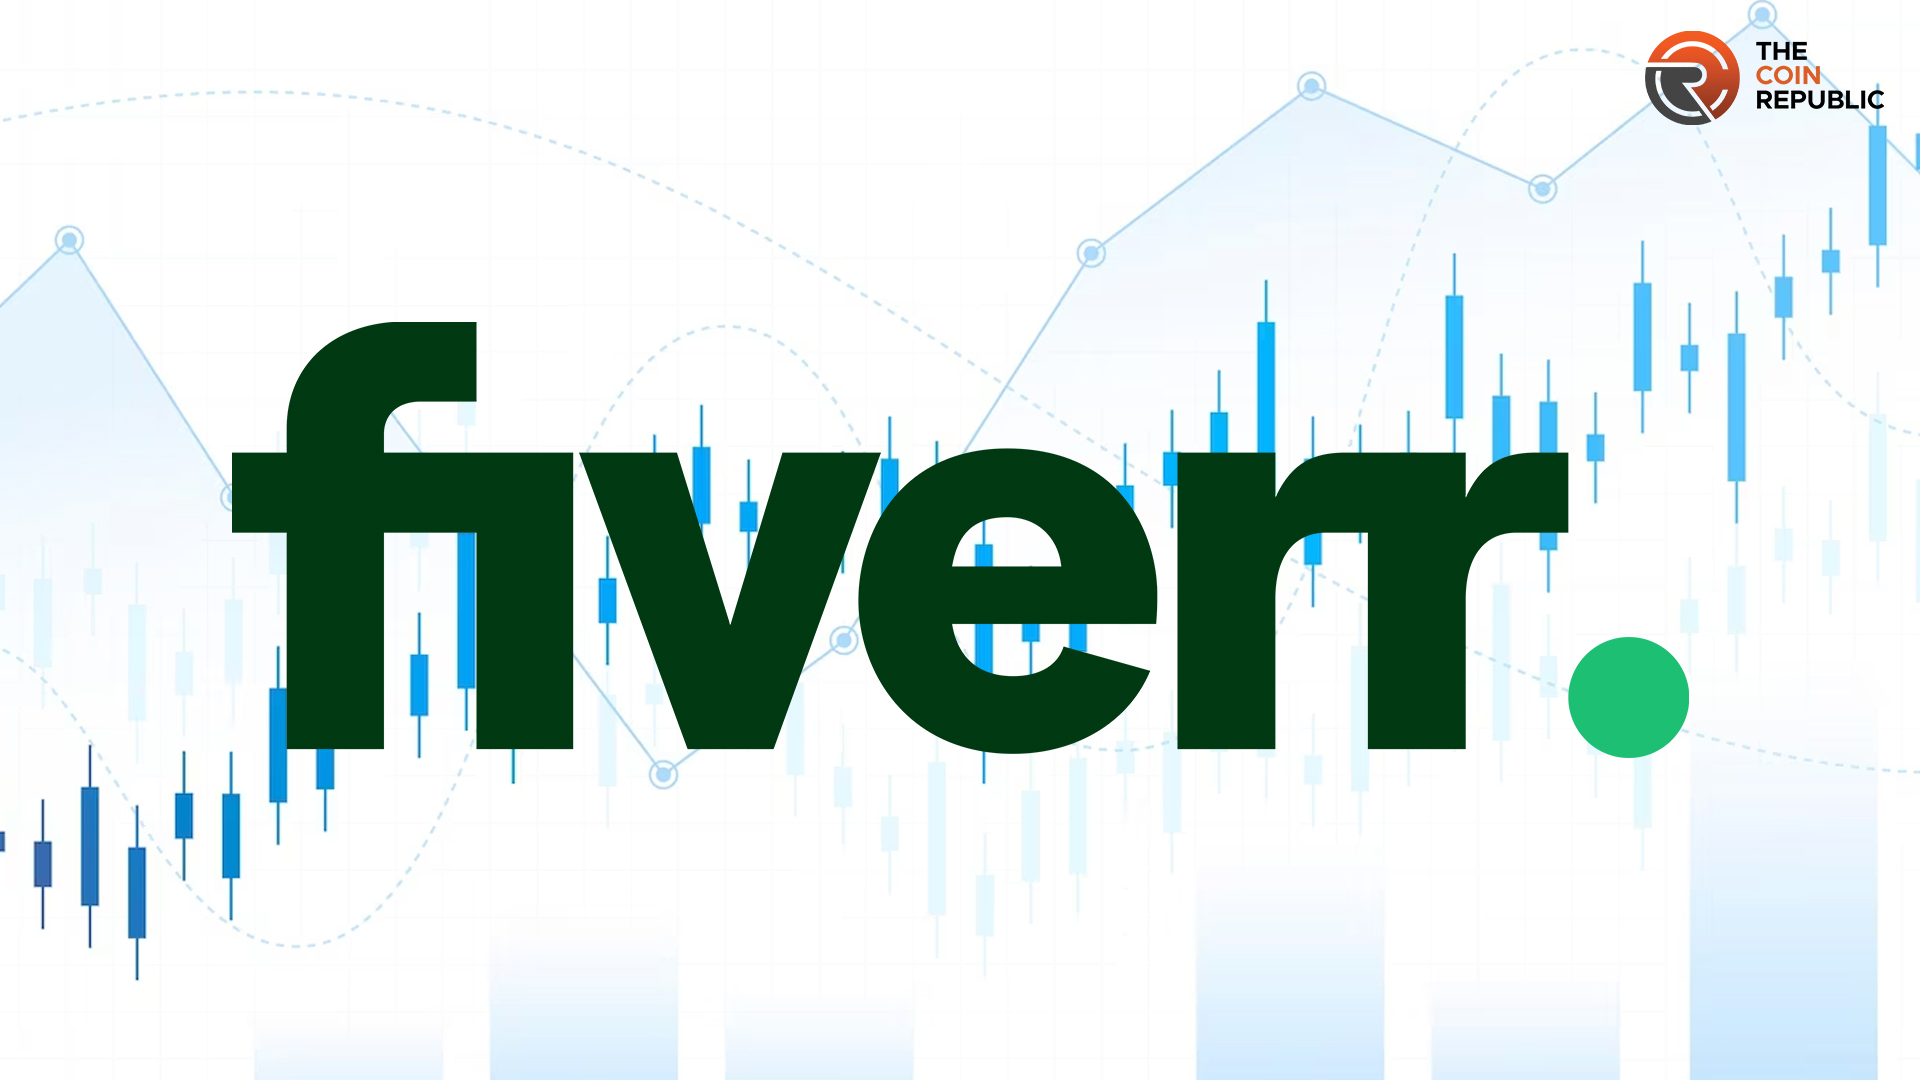 Fiverr Stock (NYSE: FVRR) Resumes Downfall, Loses 5.96% on Friday